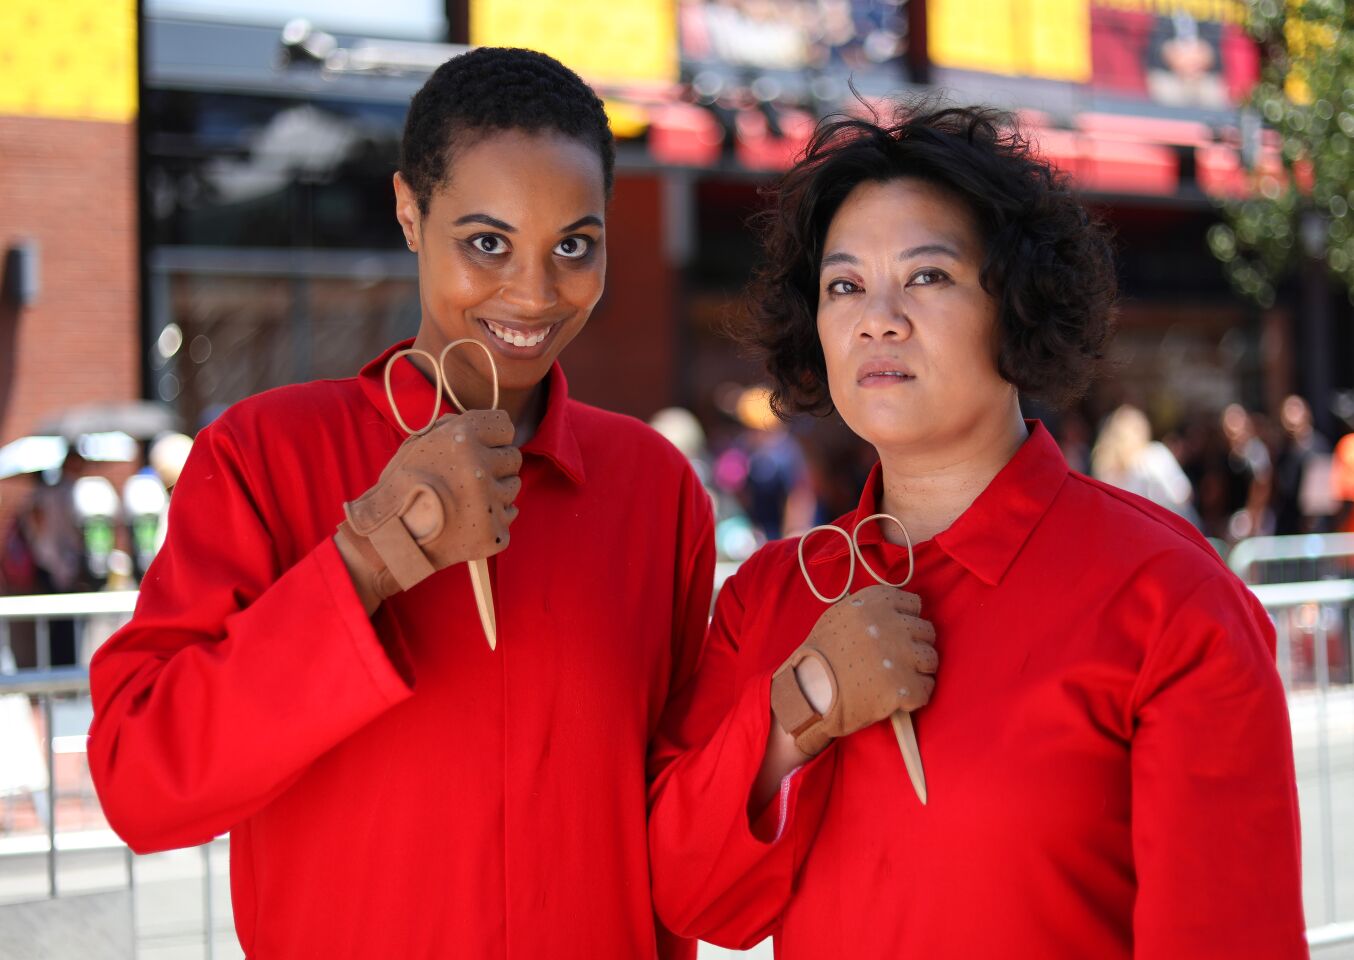 Cheryll del Rosario and Schyler Bradford of San Francisco dressed as Tethered from Jordan Peele's "Us" at Comic-Con International.